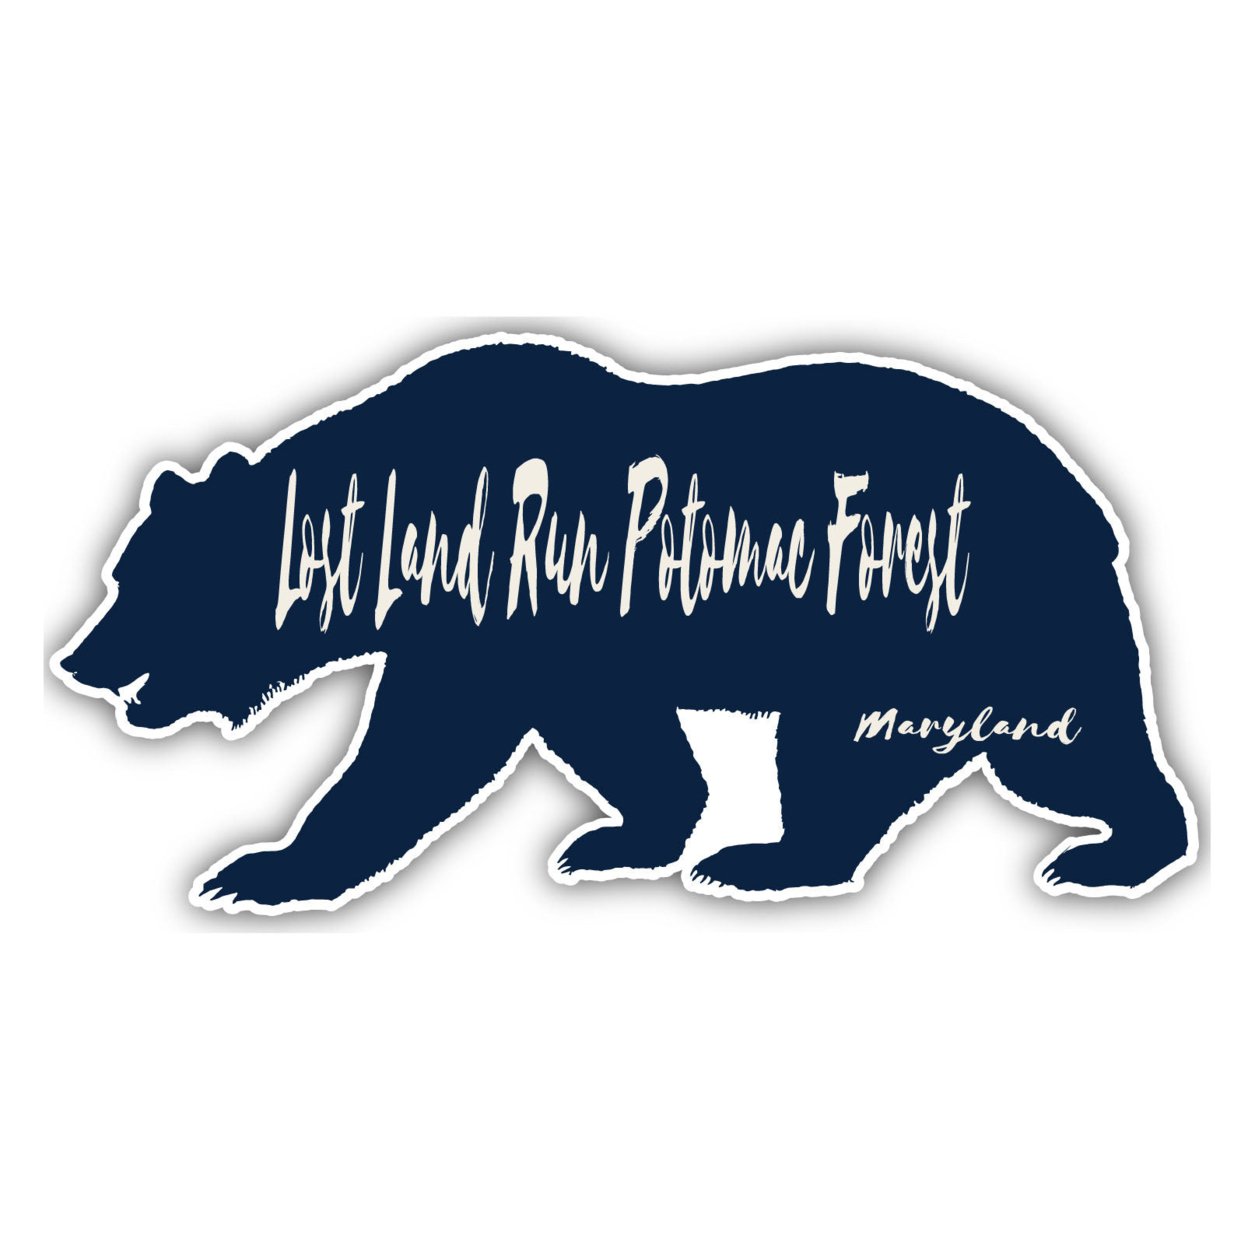 Lost Land Run Potomac Forest Maryland Souvenir Decorative Stickers (Choose Theme And Size) - 4-Inch, Bear